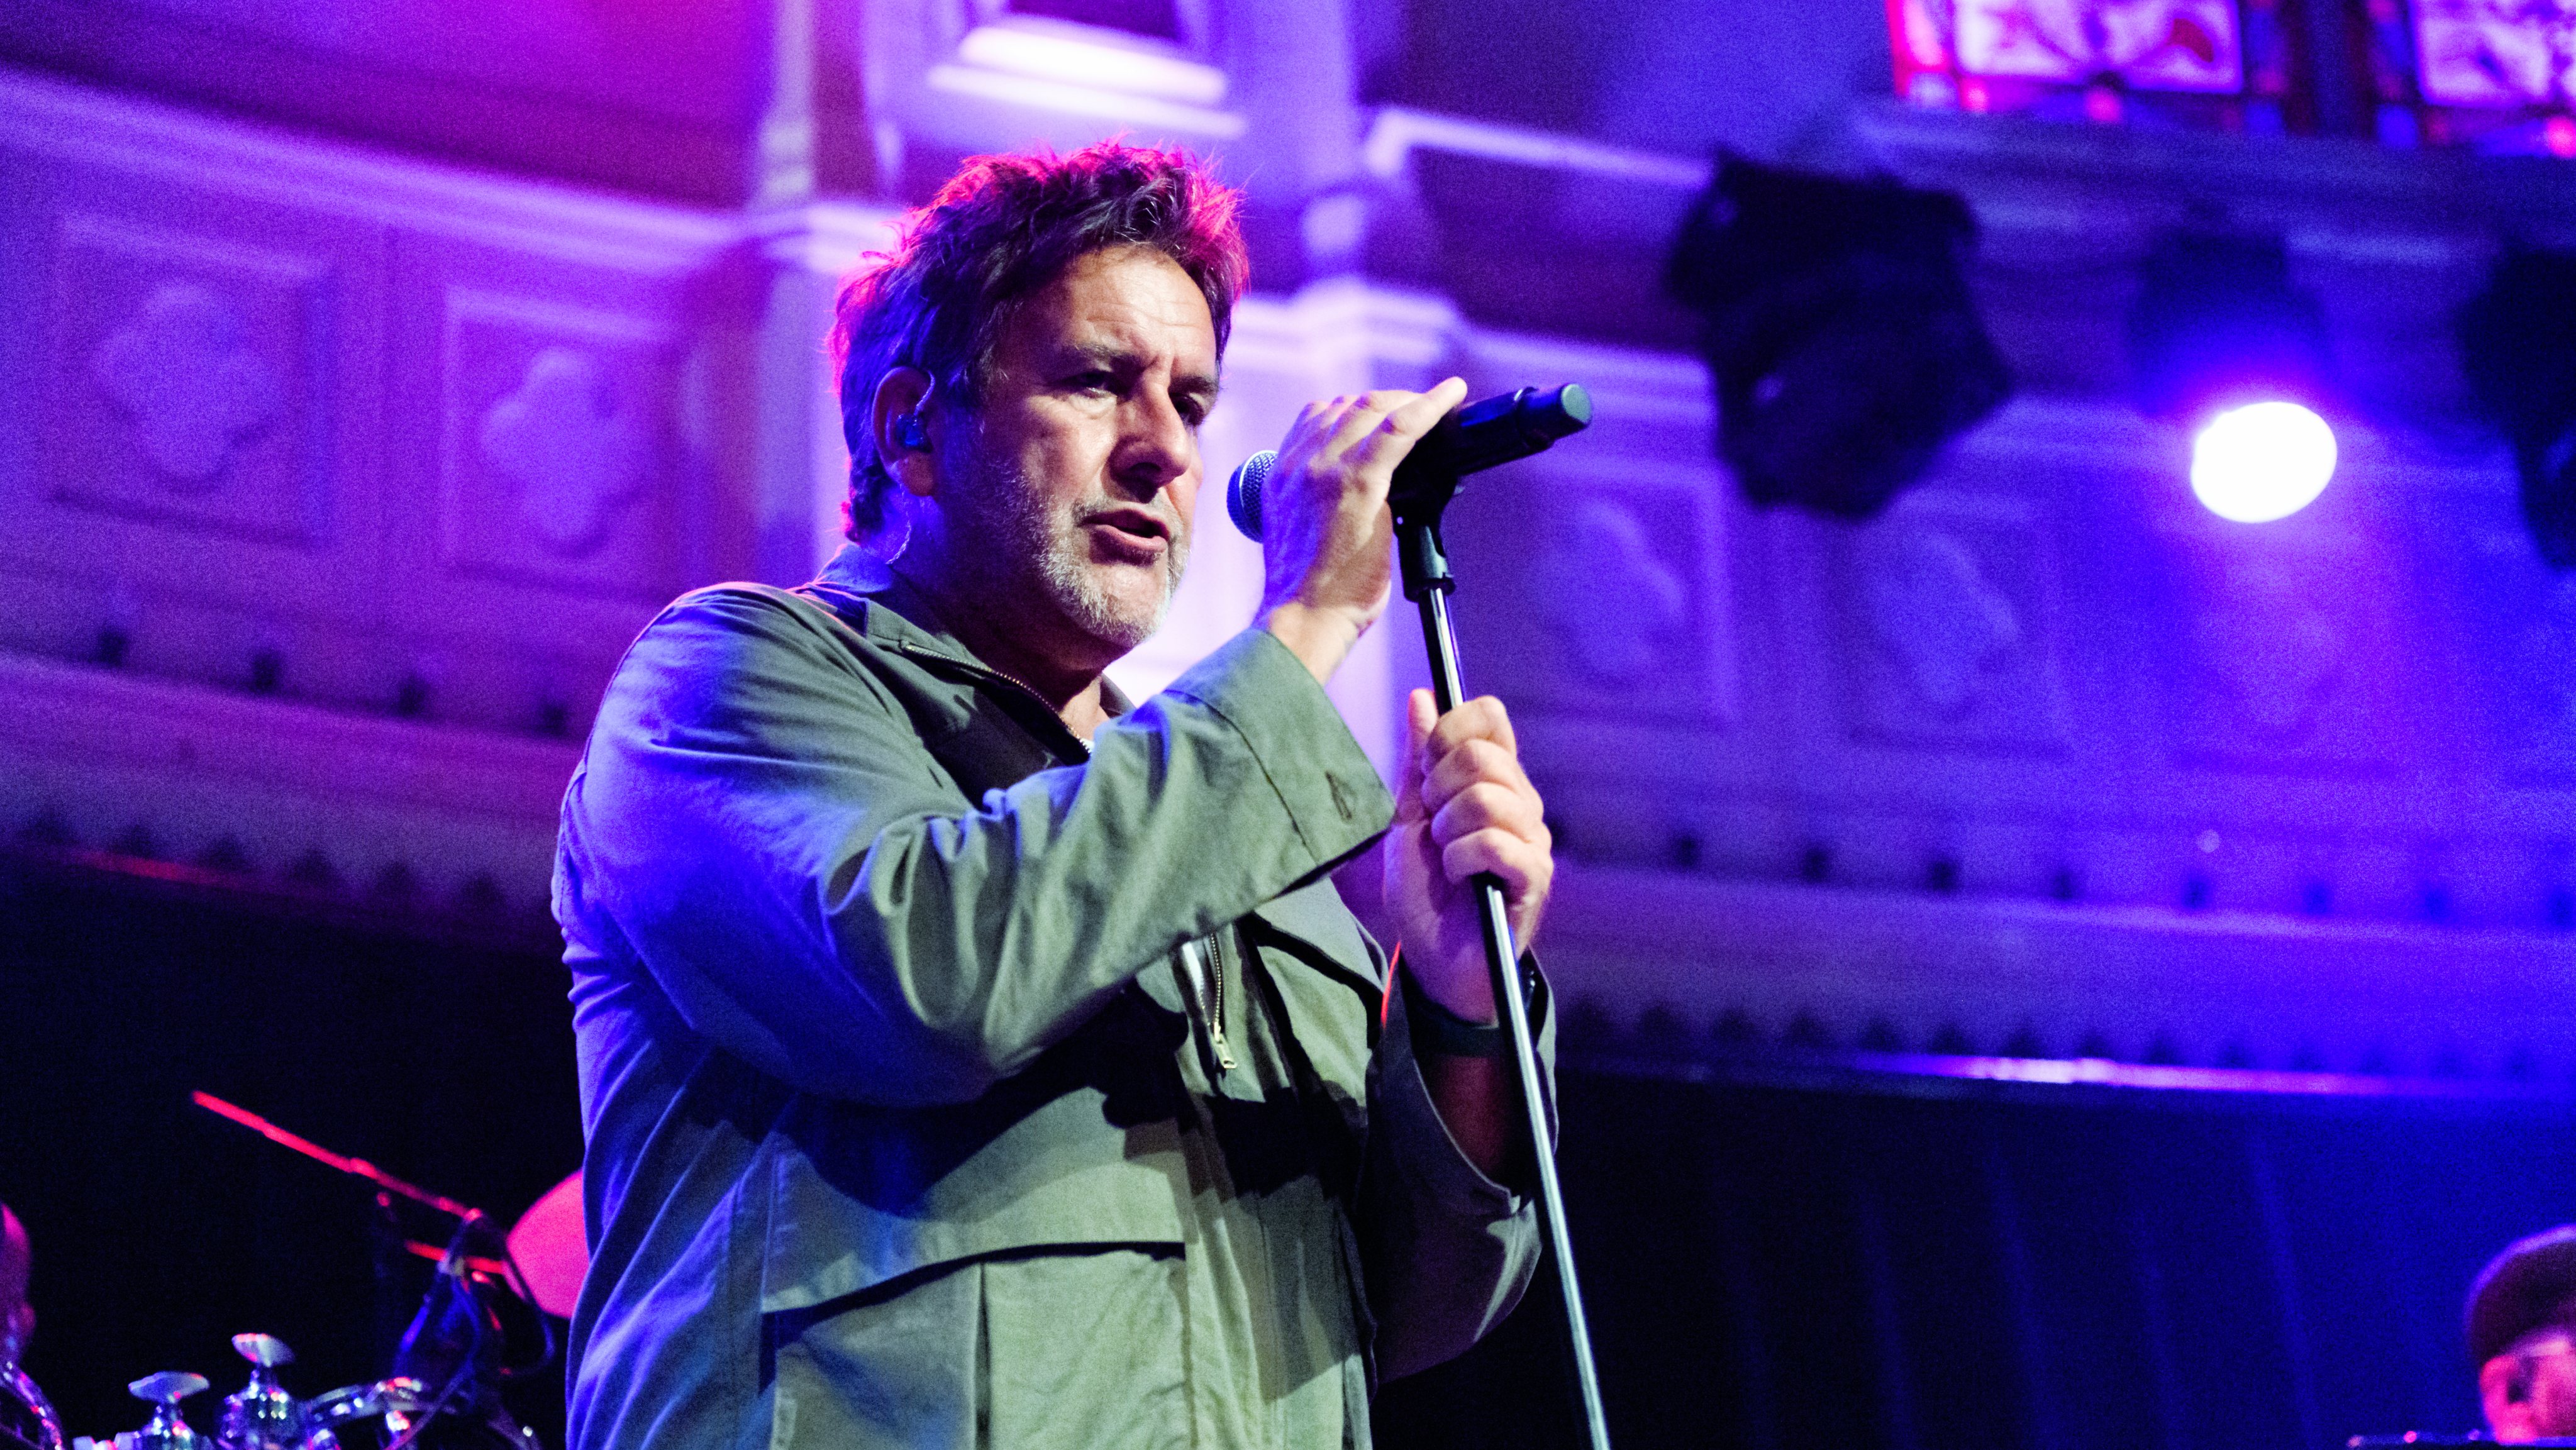 The Specials Perform At Paradiso In Amsterdam